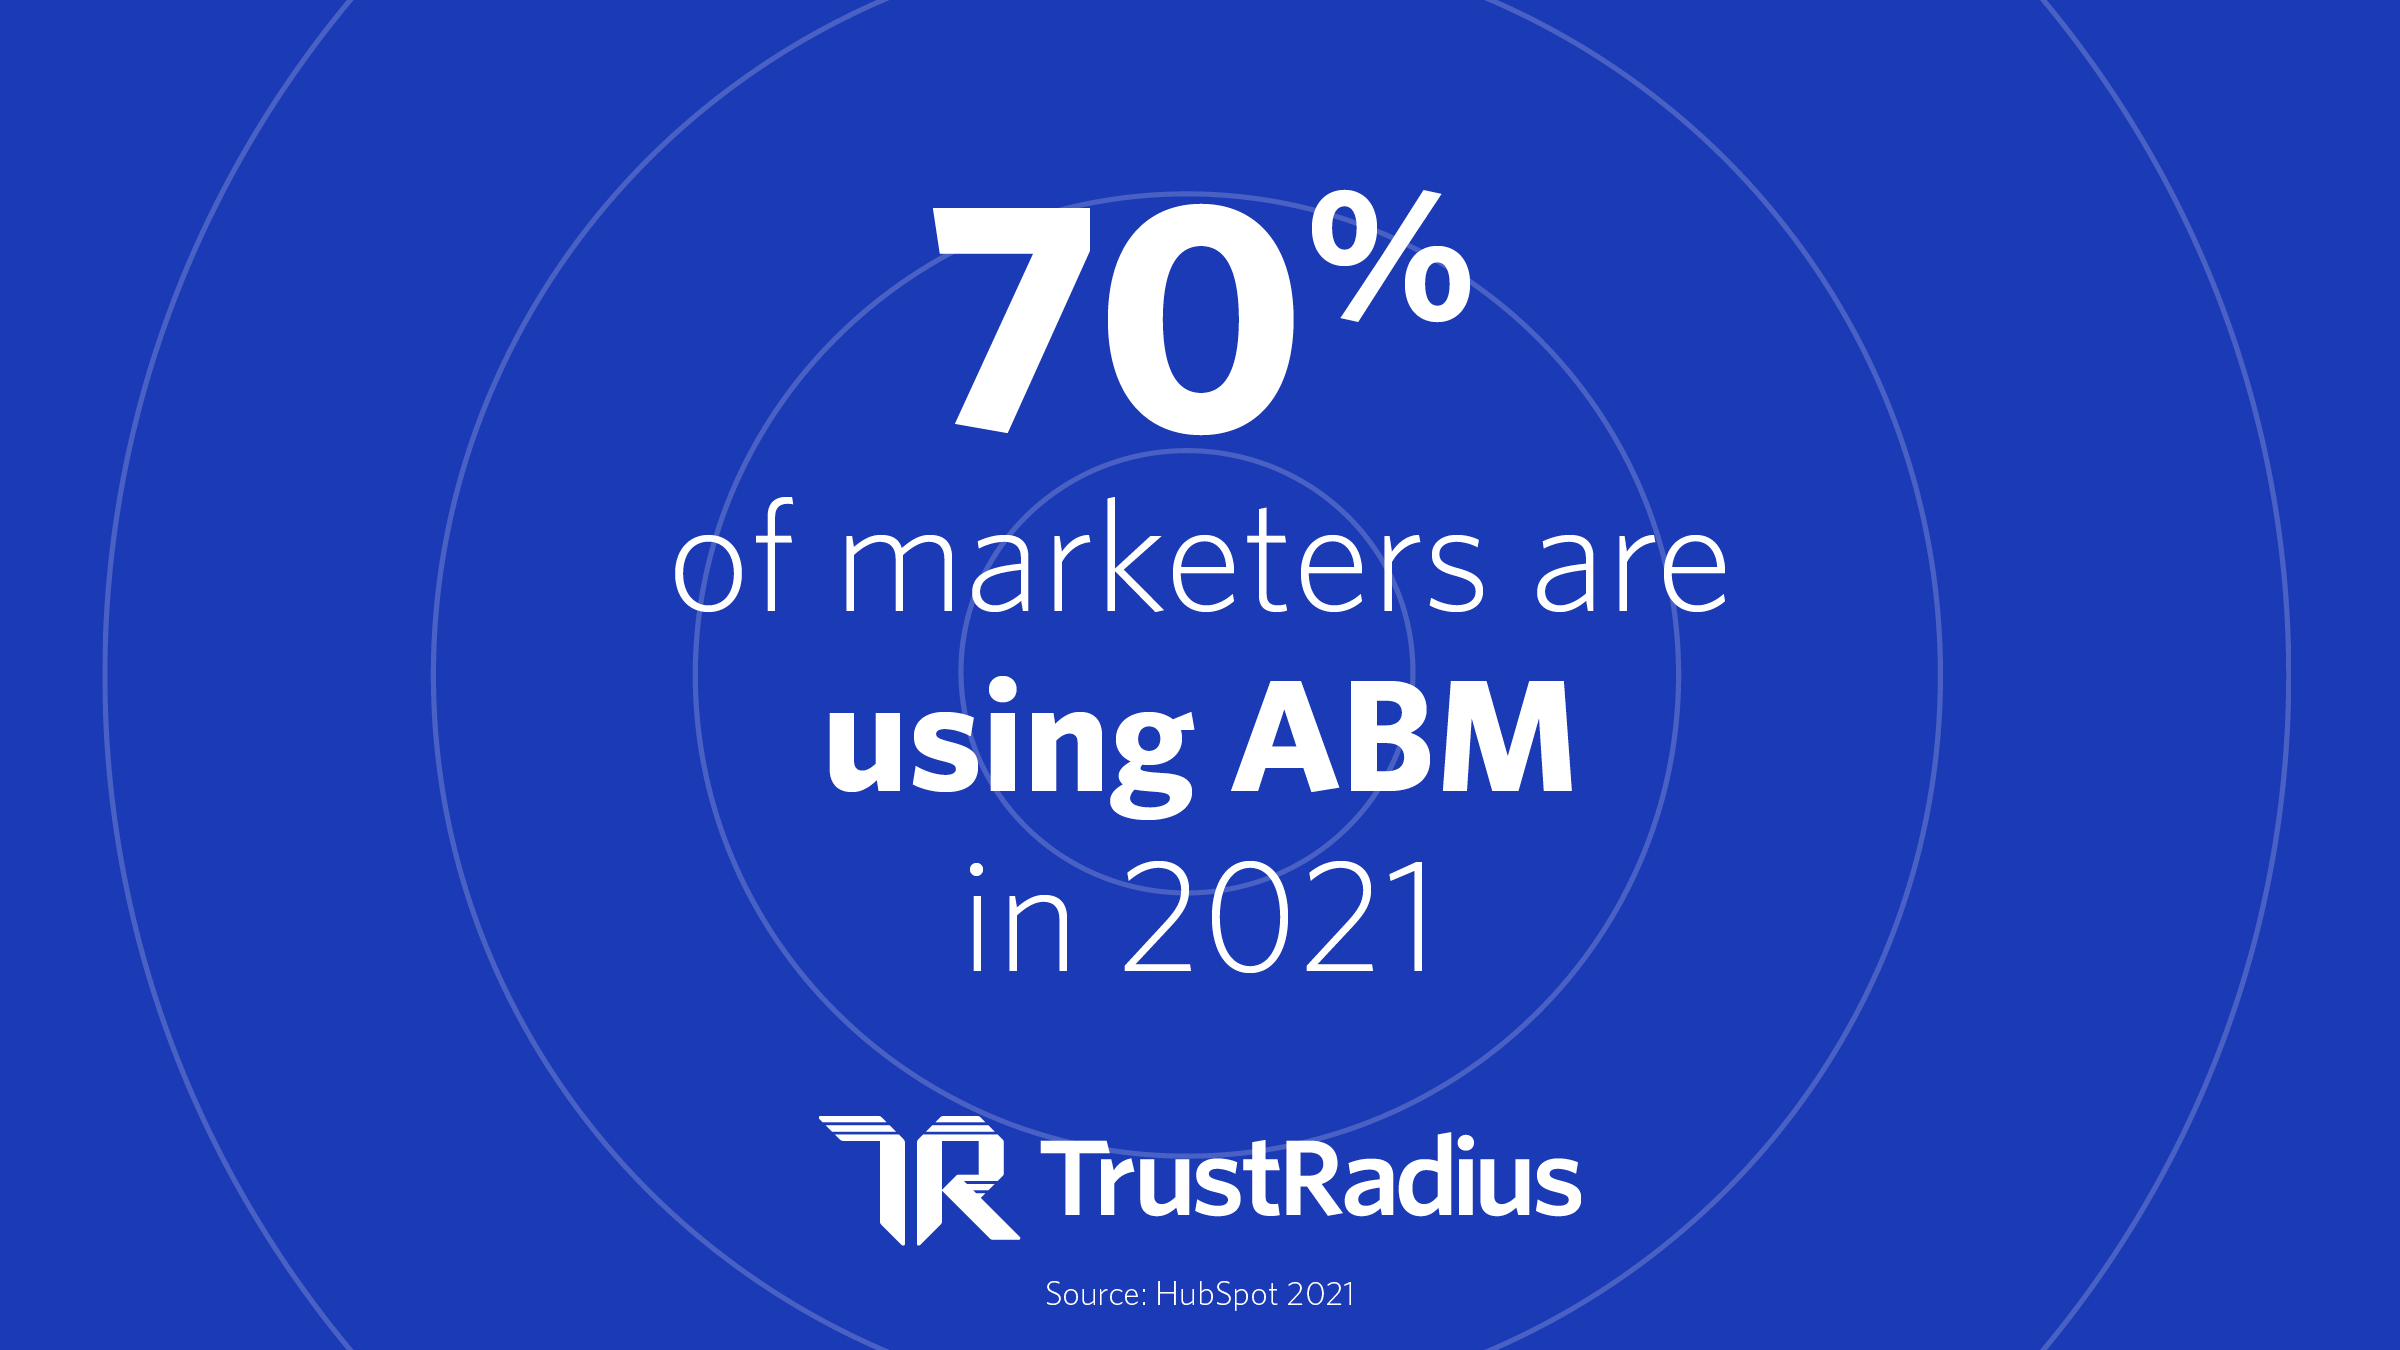 70% of marketers are using ABM in 2021